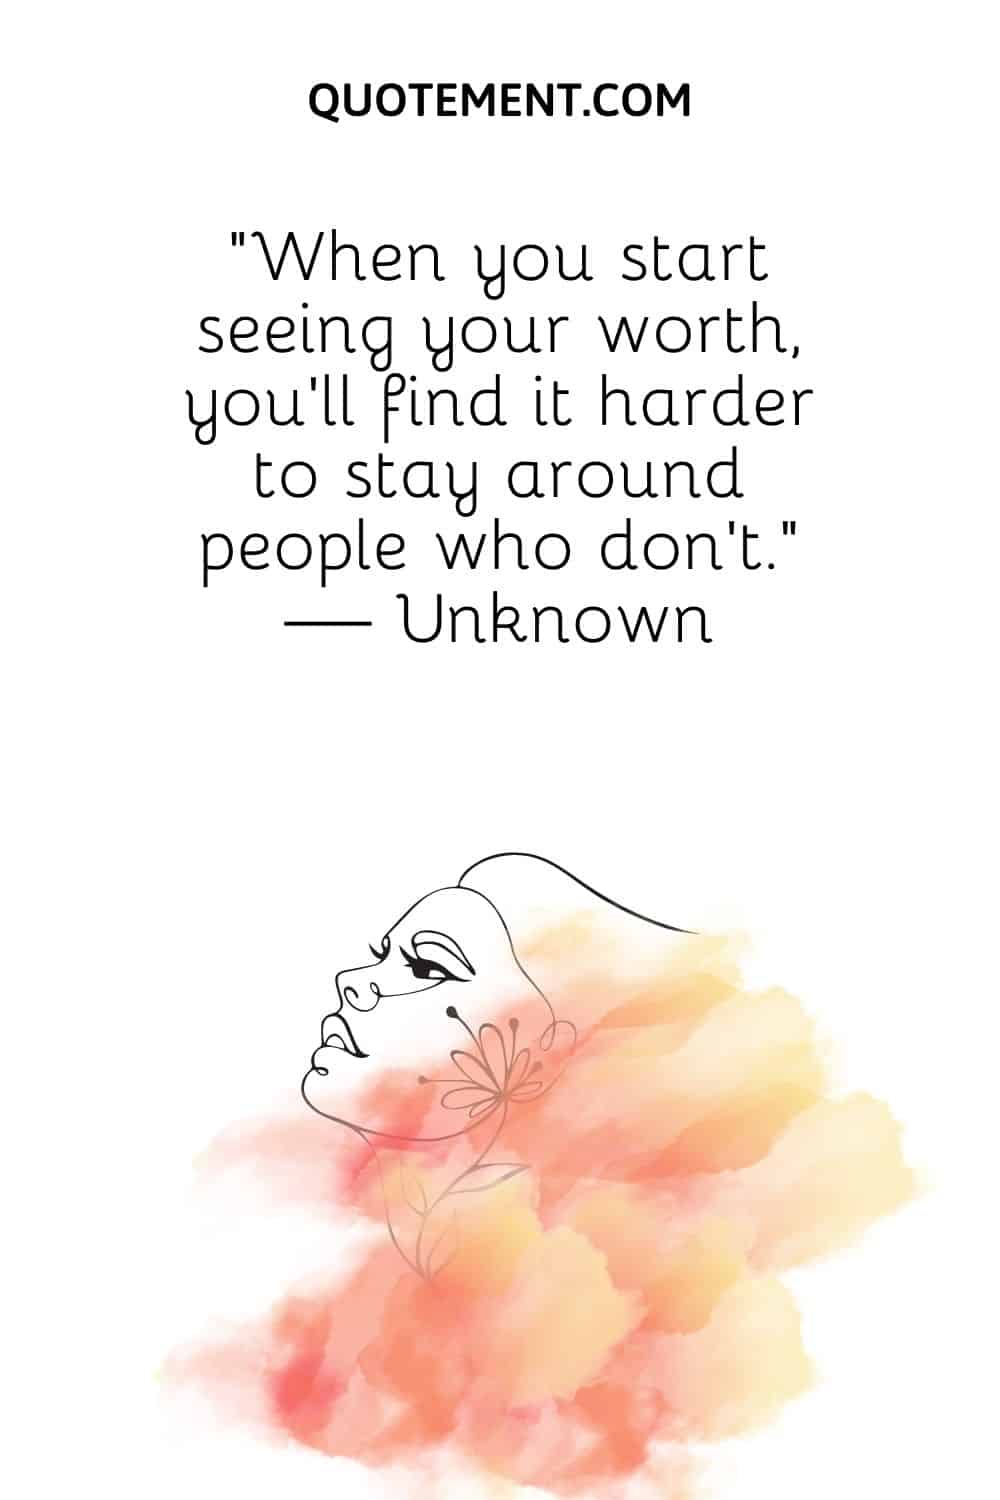 When you start seeing your worth, you’ll find it harder to stay around people who don’t.